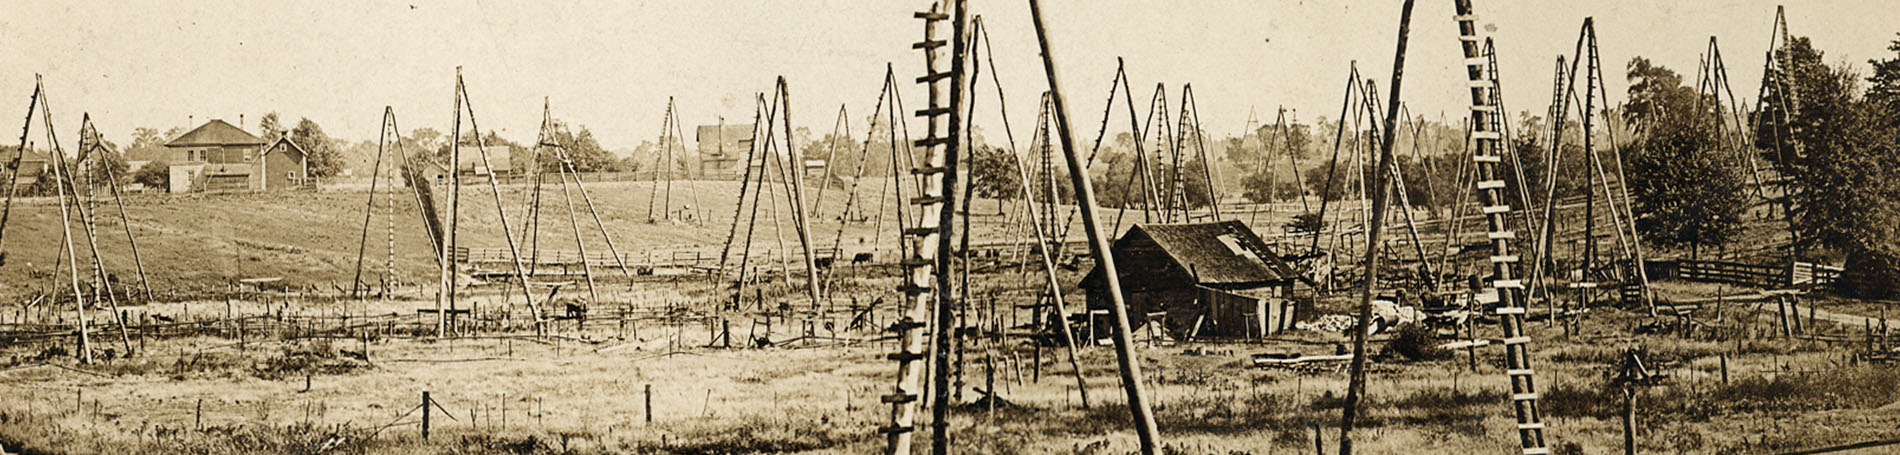 Historic view of oil fields in Oil Springs